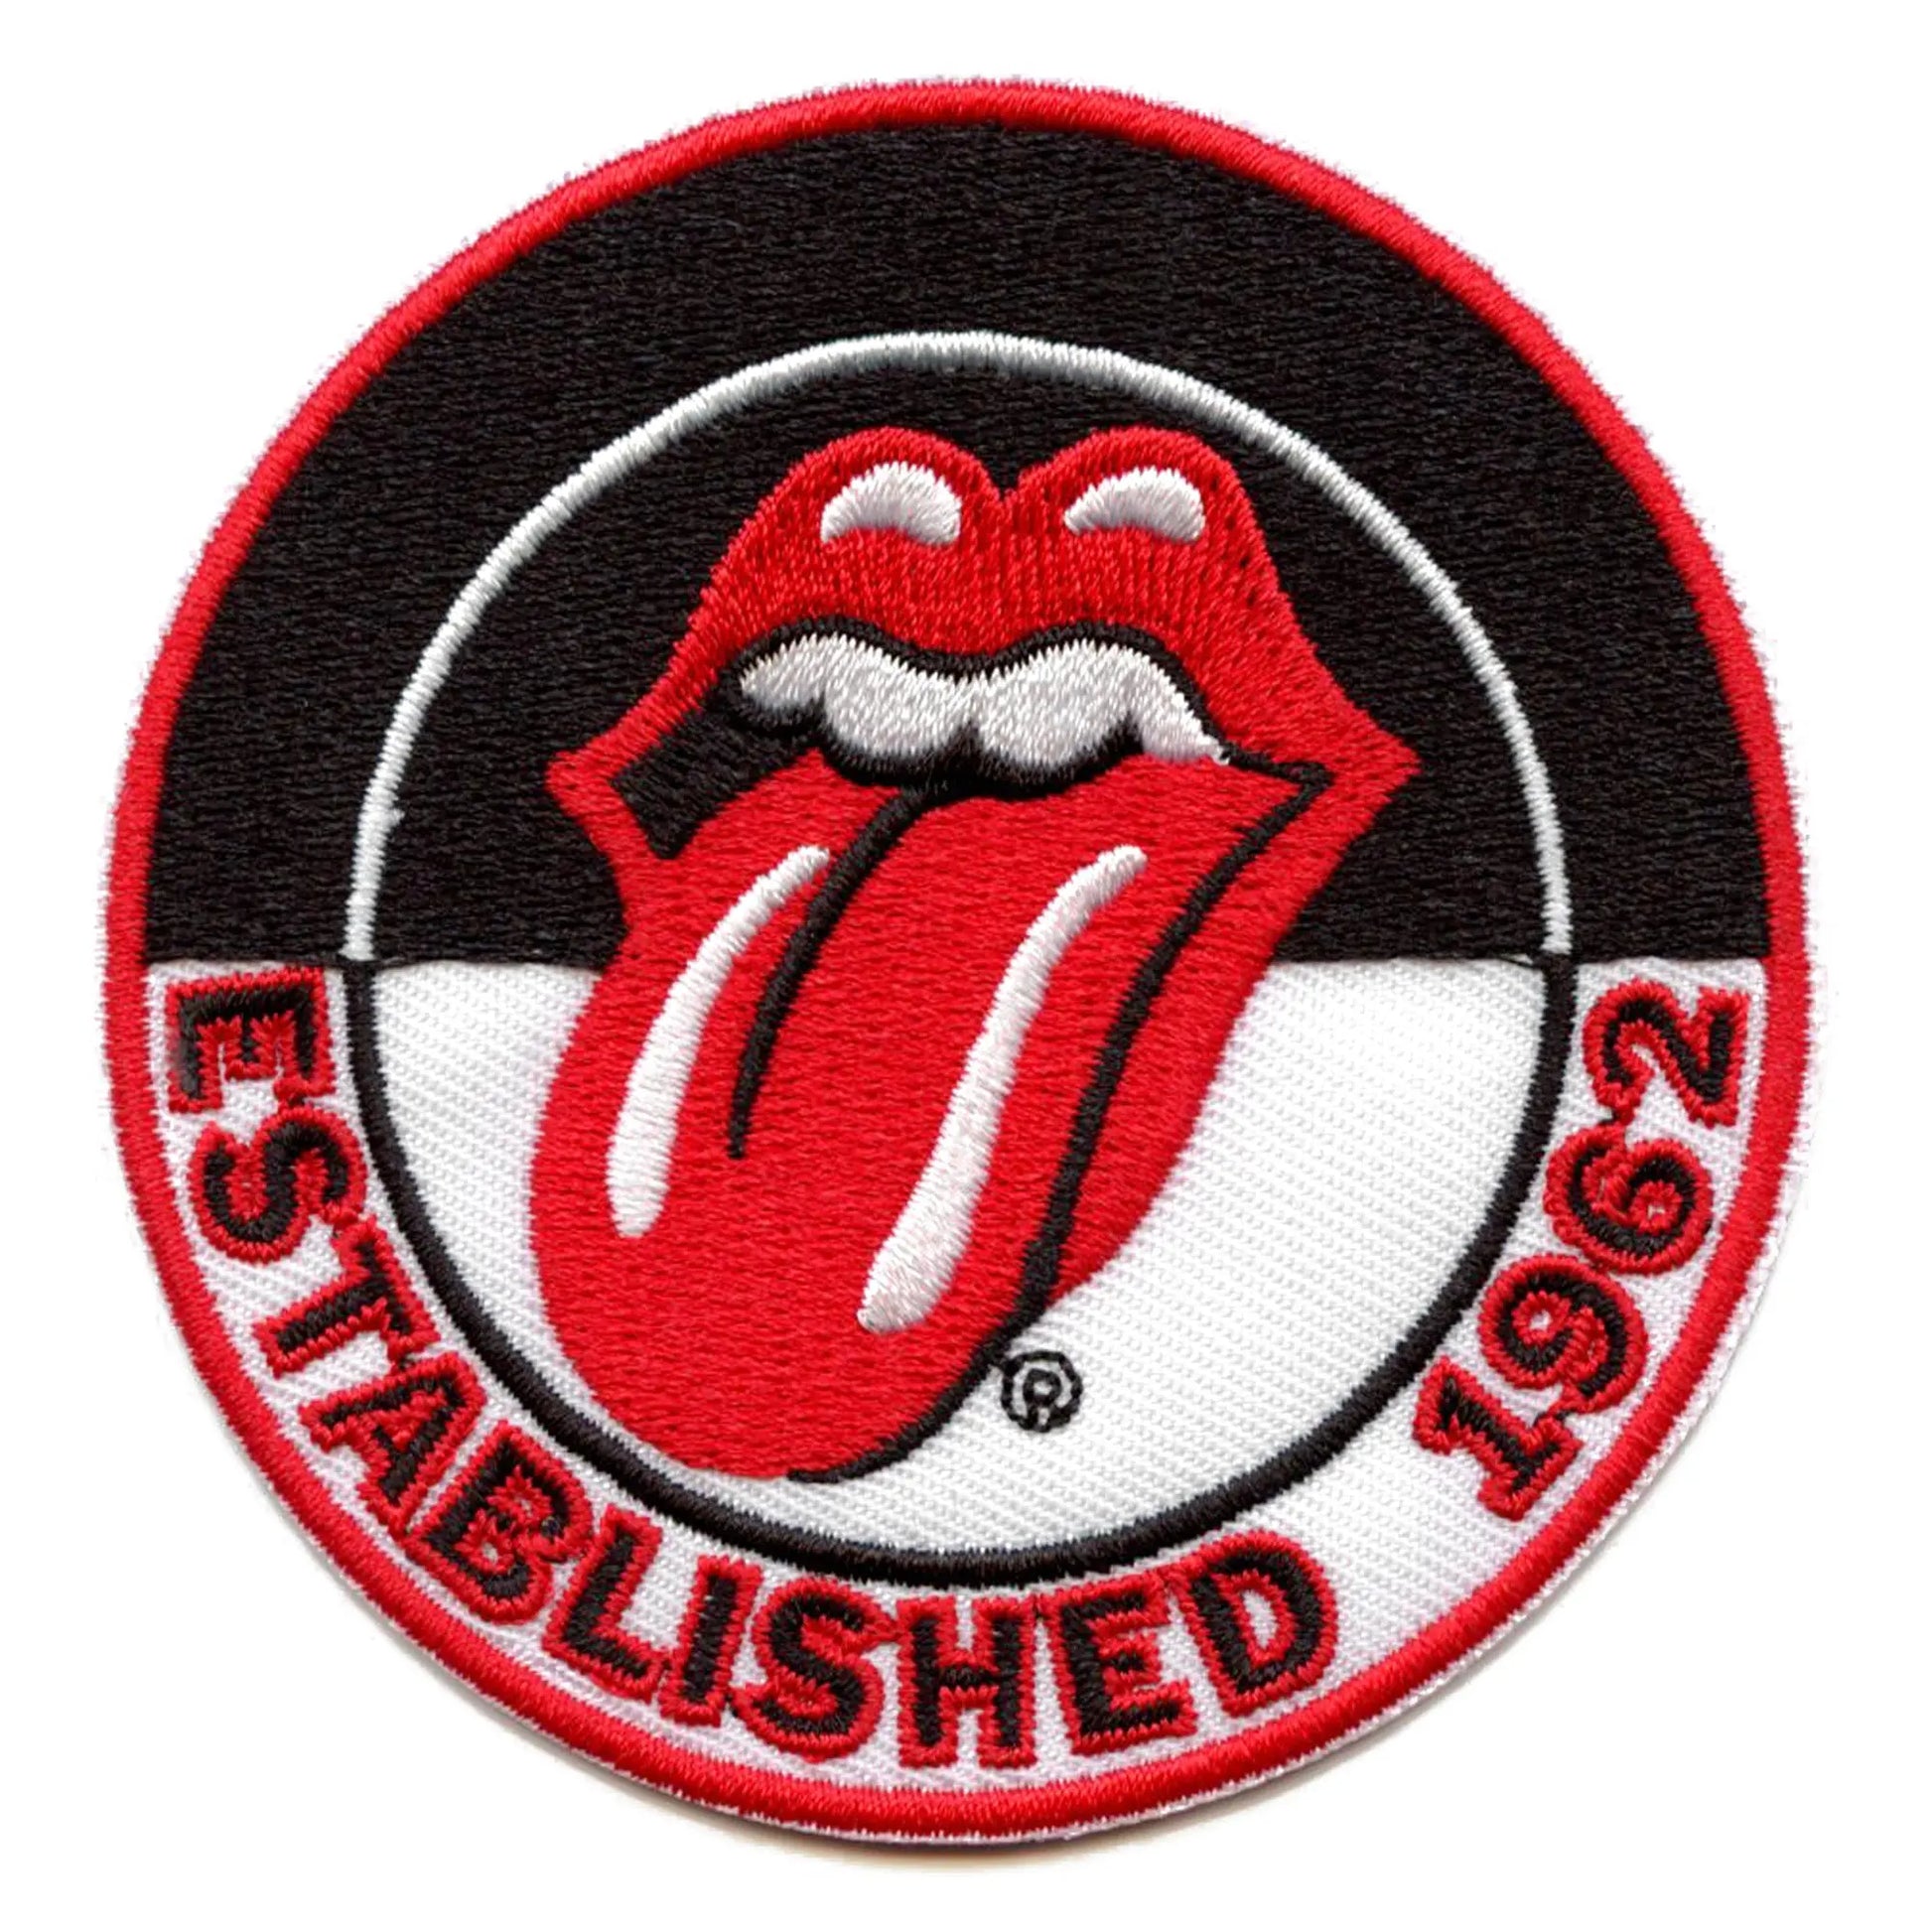 Rolling Stones Round Patch Established In 1962 Mick Jagger Embroidered Iron On